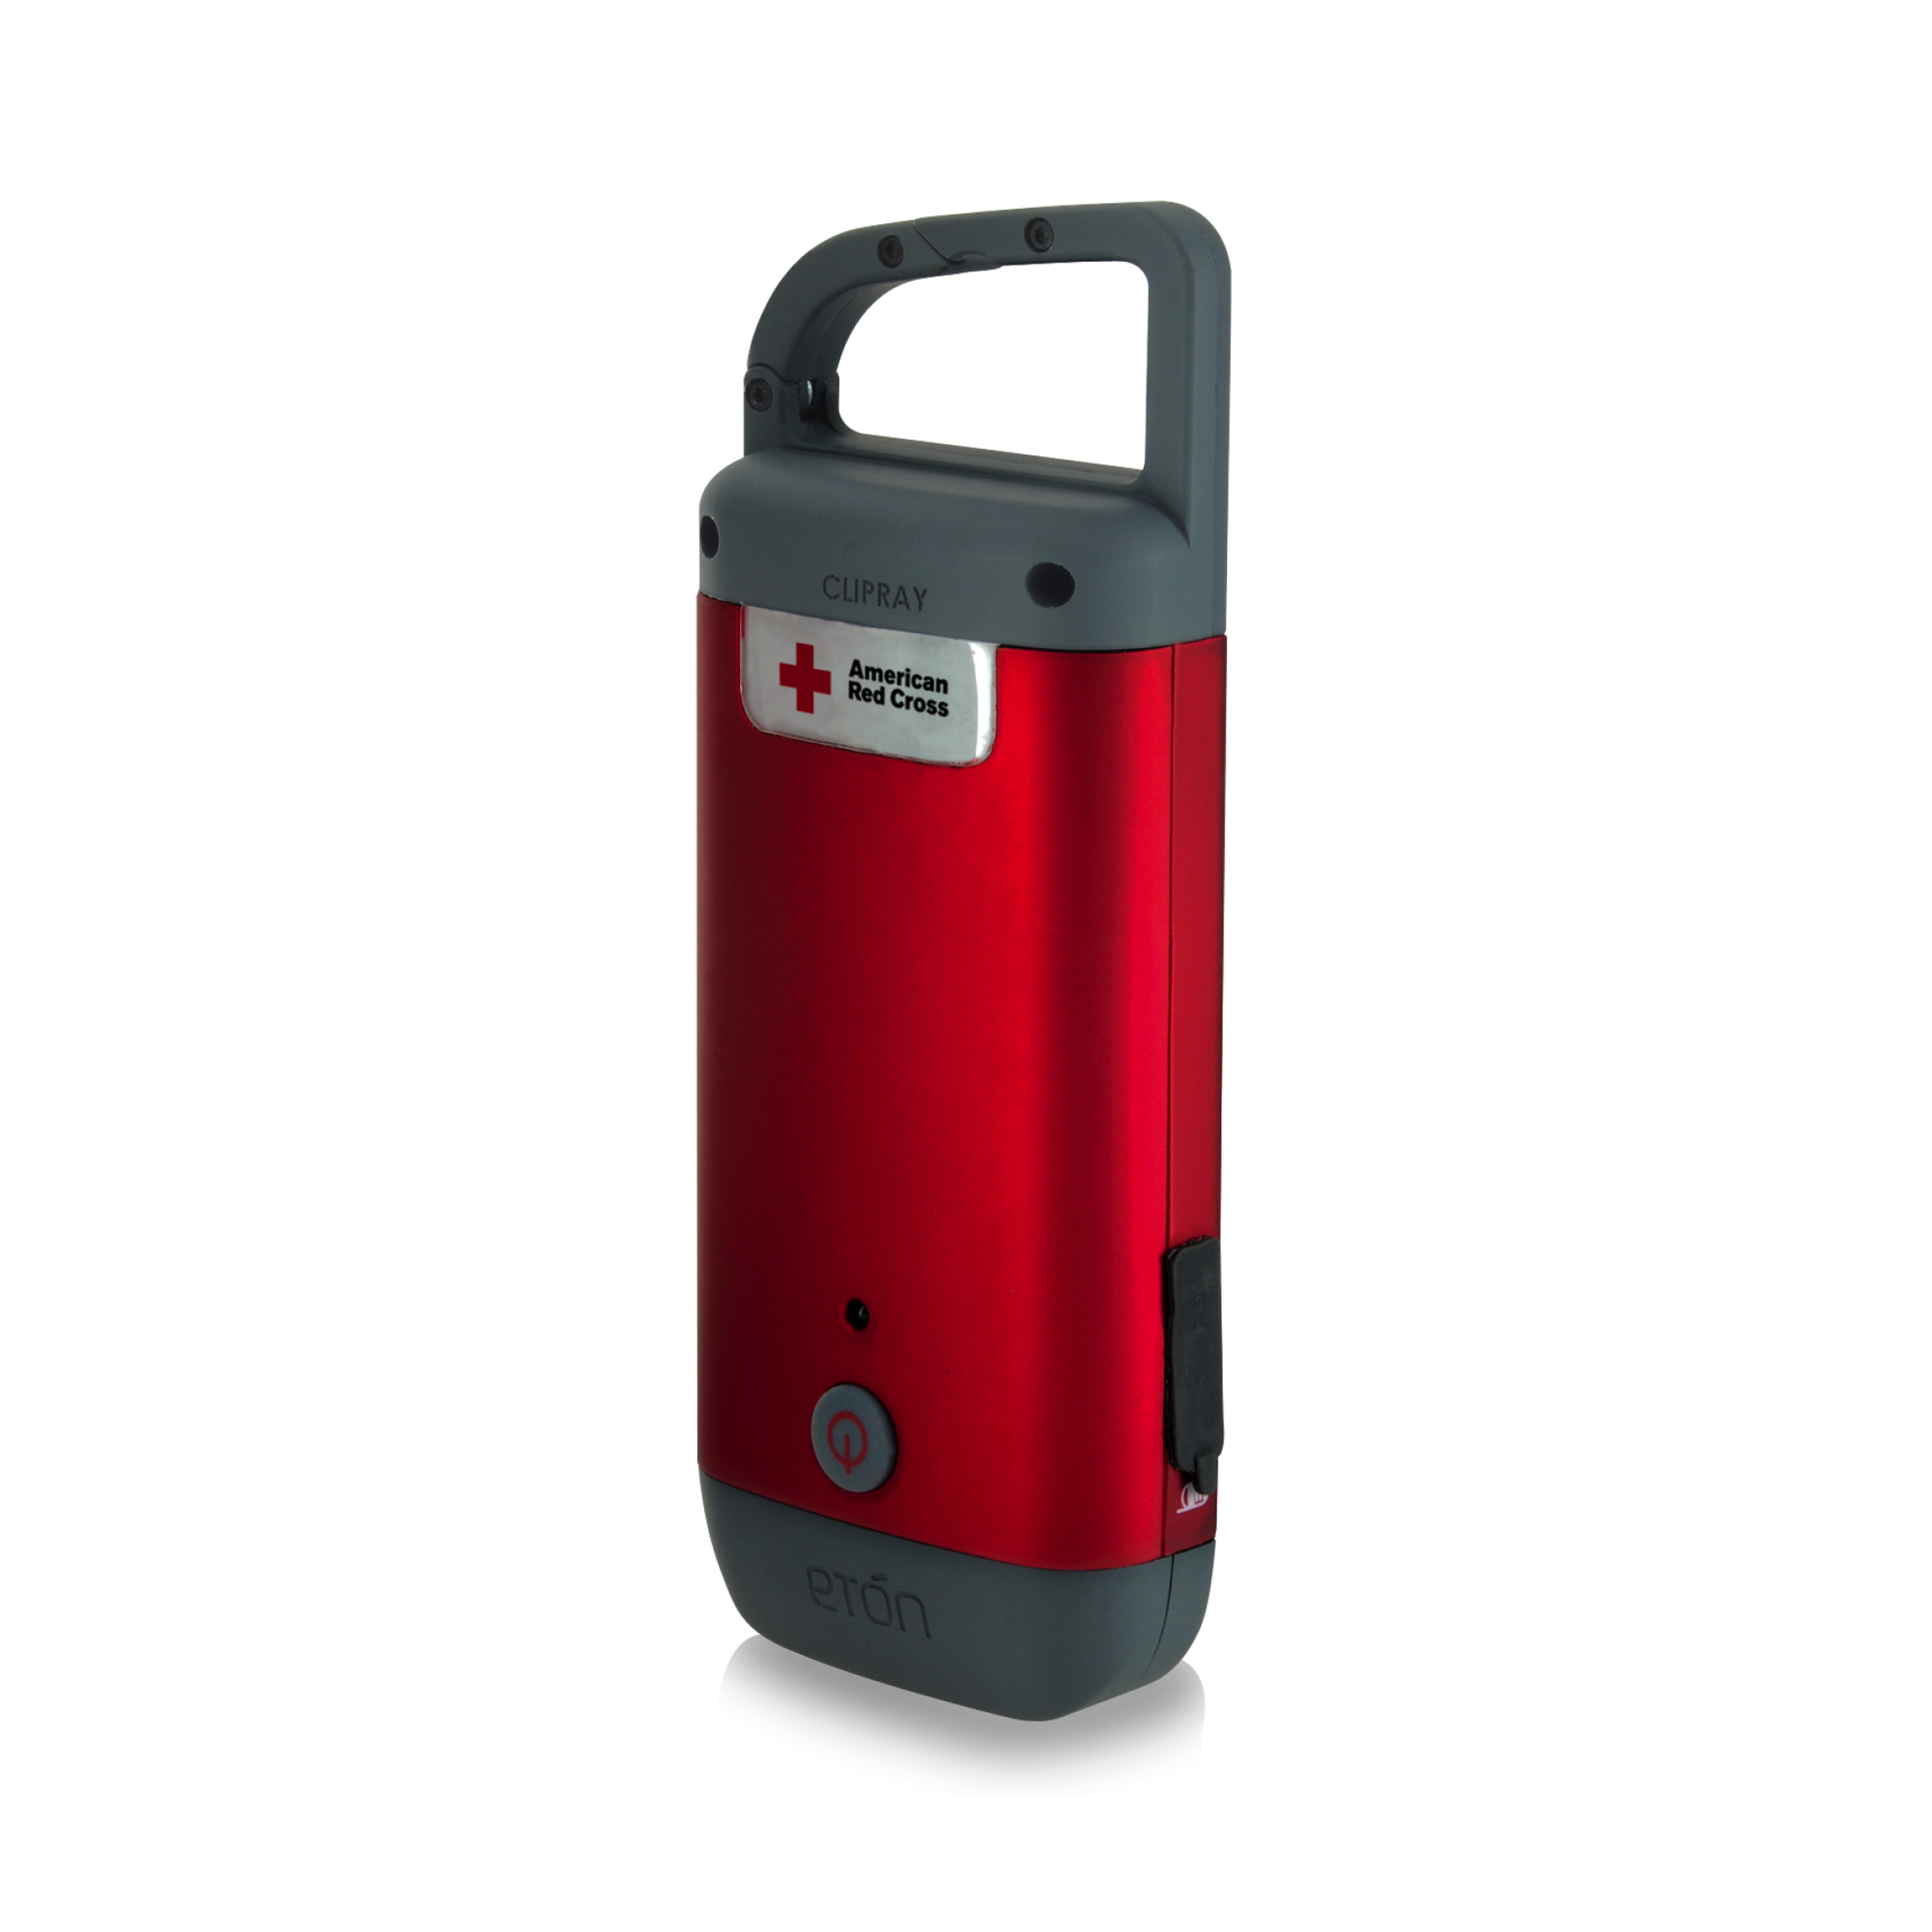 Eton- American Red Cross Clipray Clip-on Flashlight and Charger